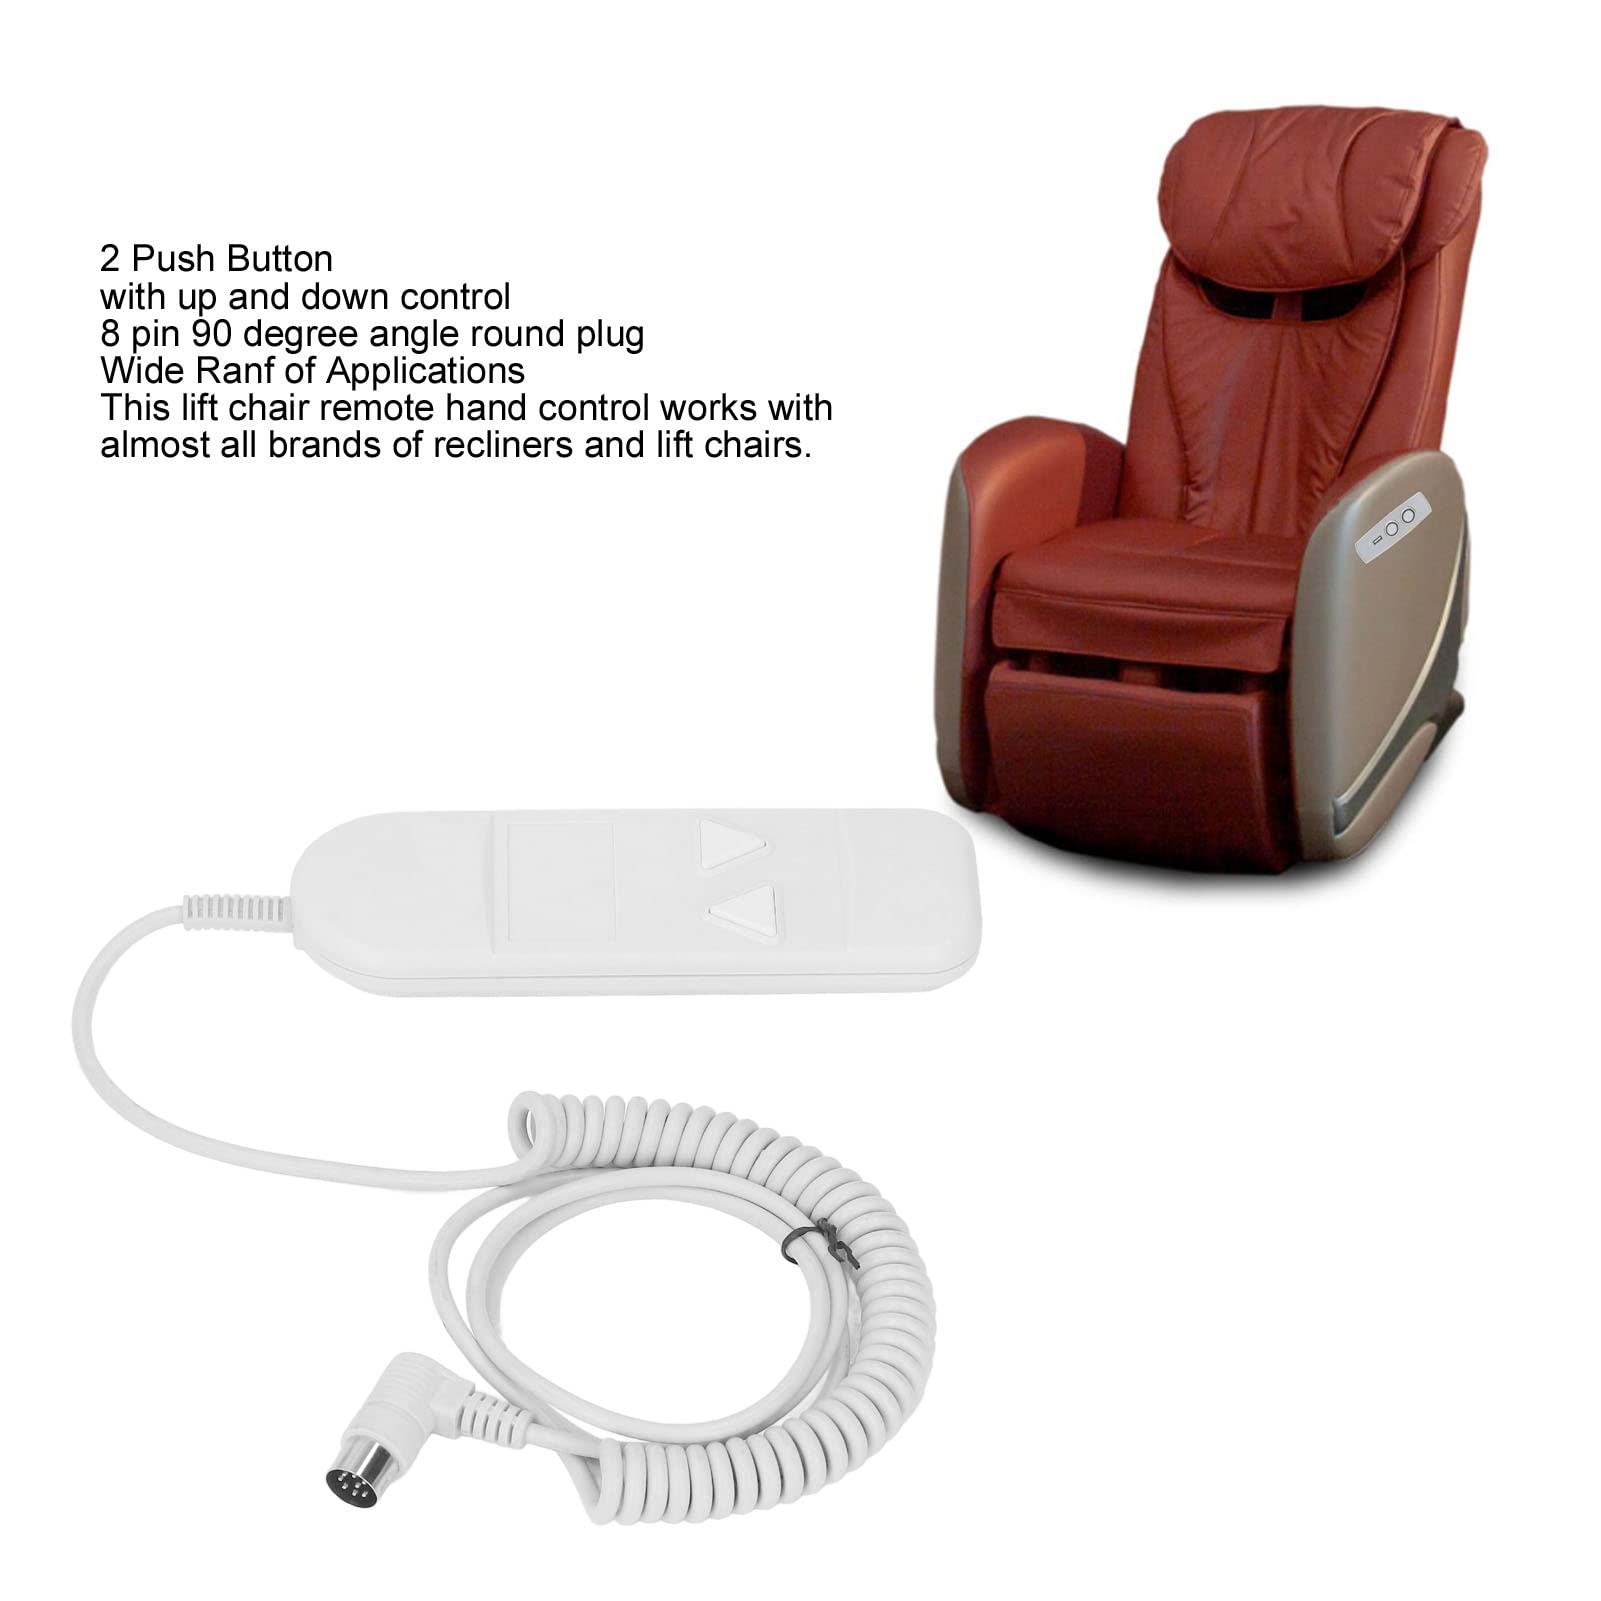 Natudeco 8 Pin 2 Button Remote Handset Controller Power Recliner Controller Plastic Hand Control Replacement for Lift Chair Power Recliner